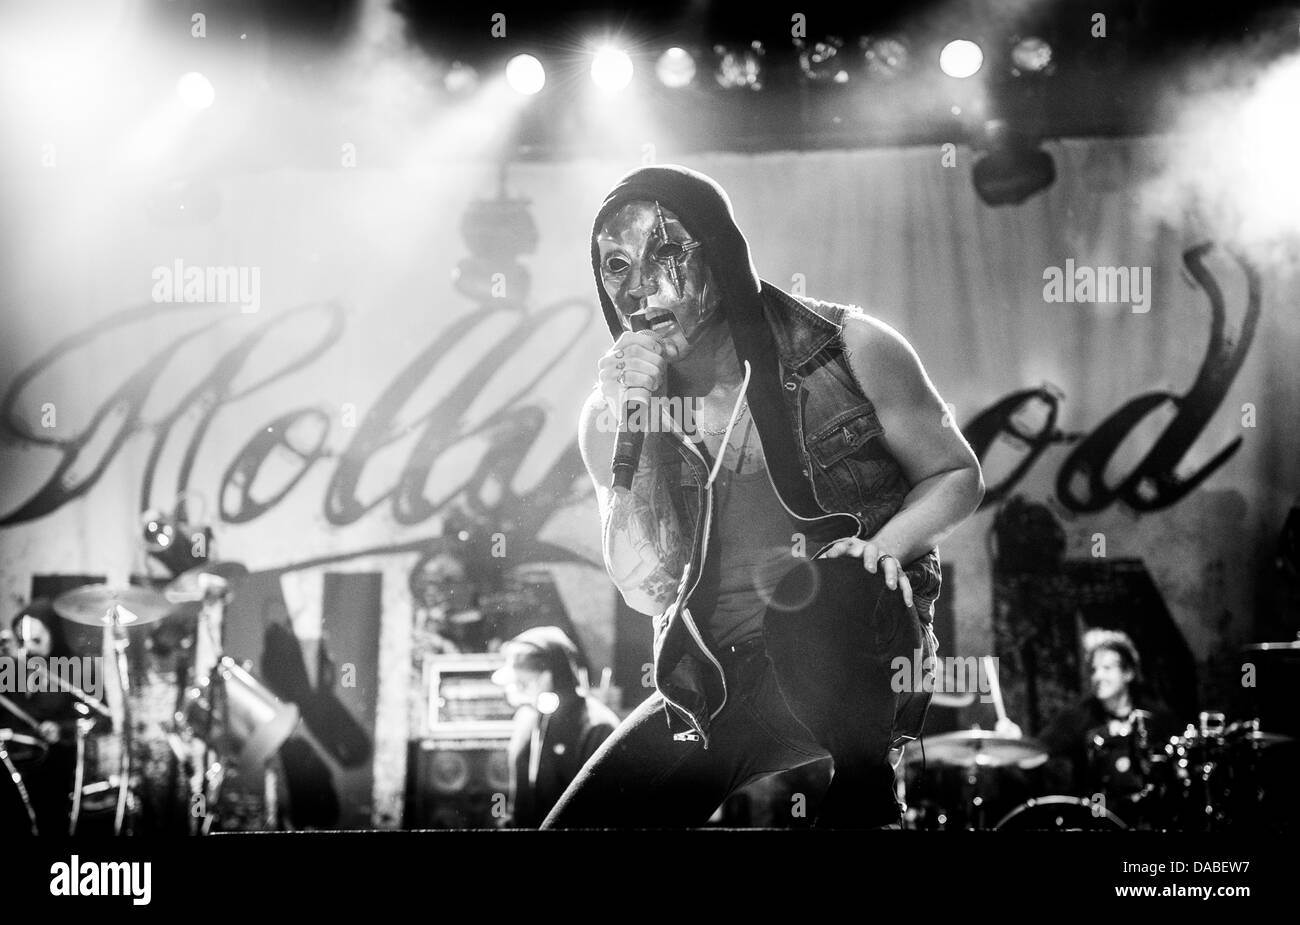 Hollywood Undead performing live Stock Photo